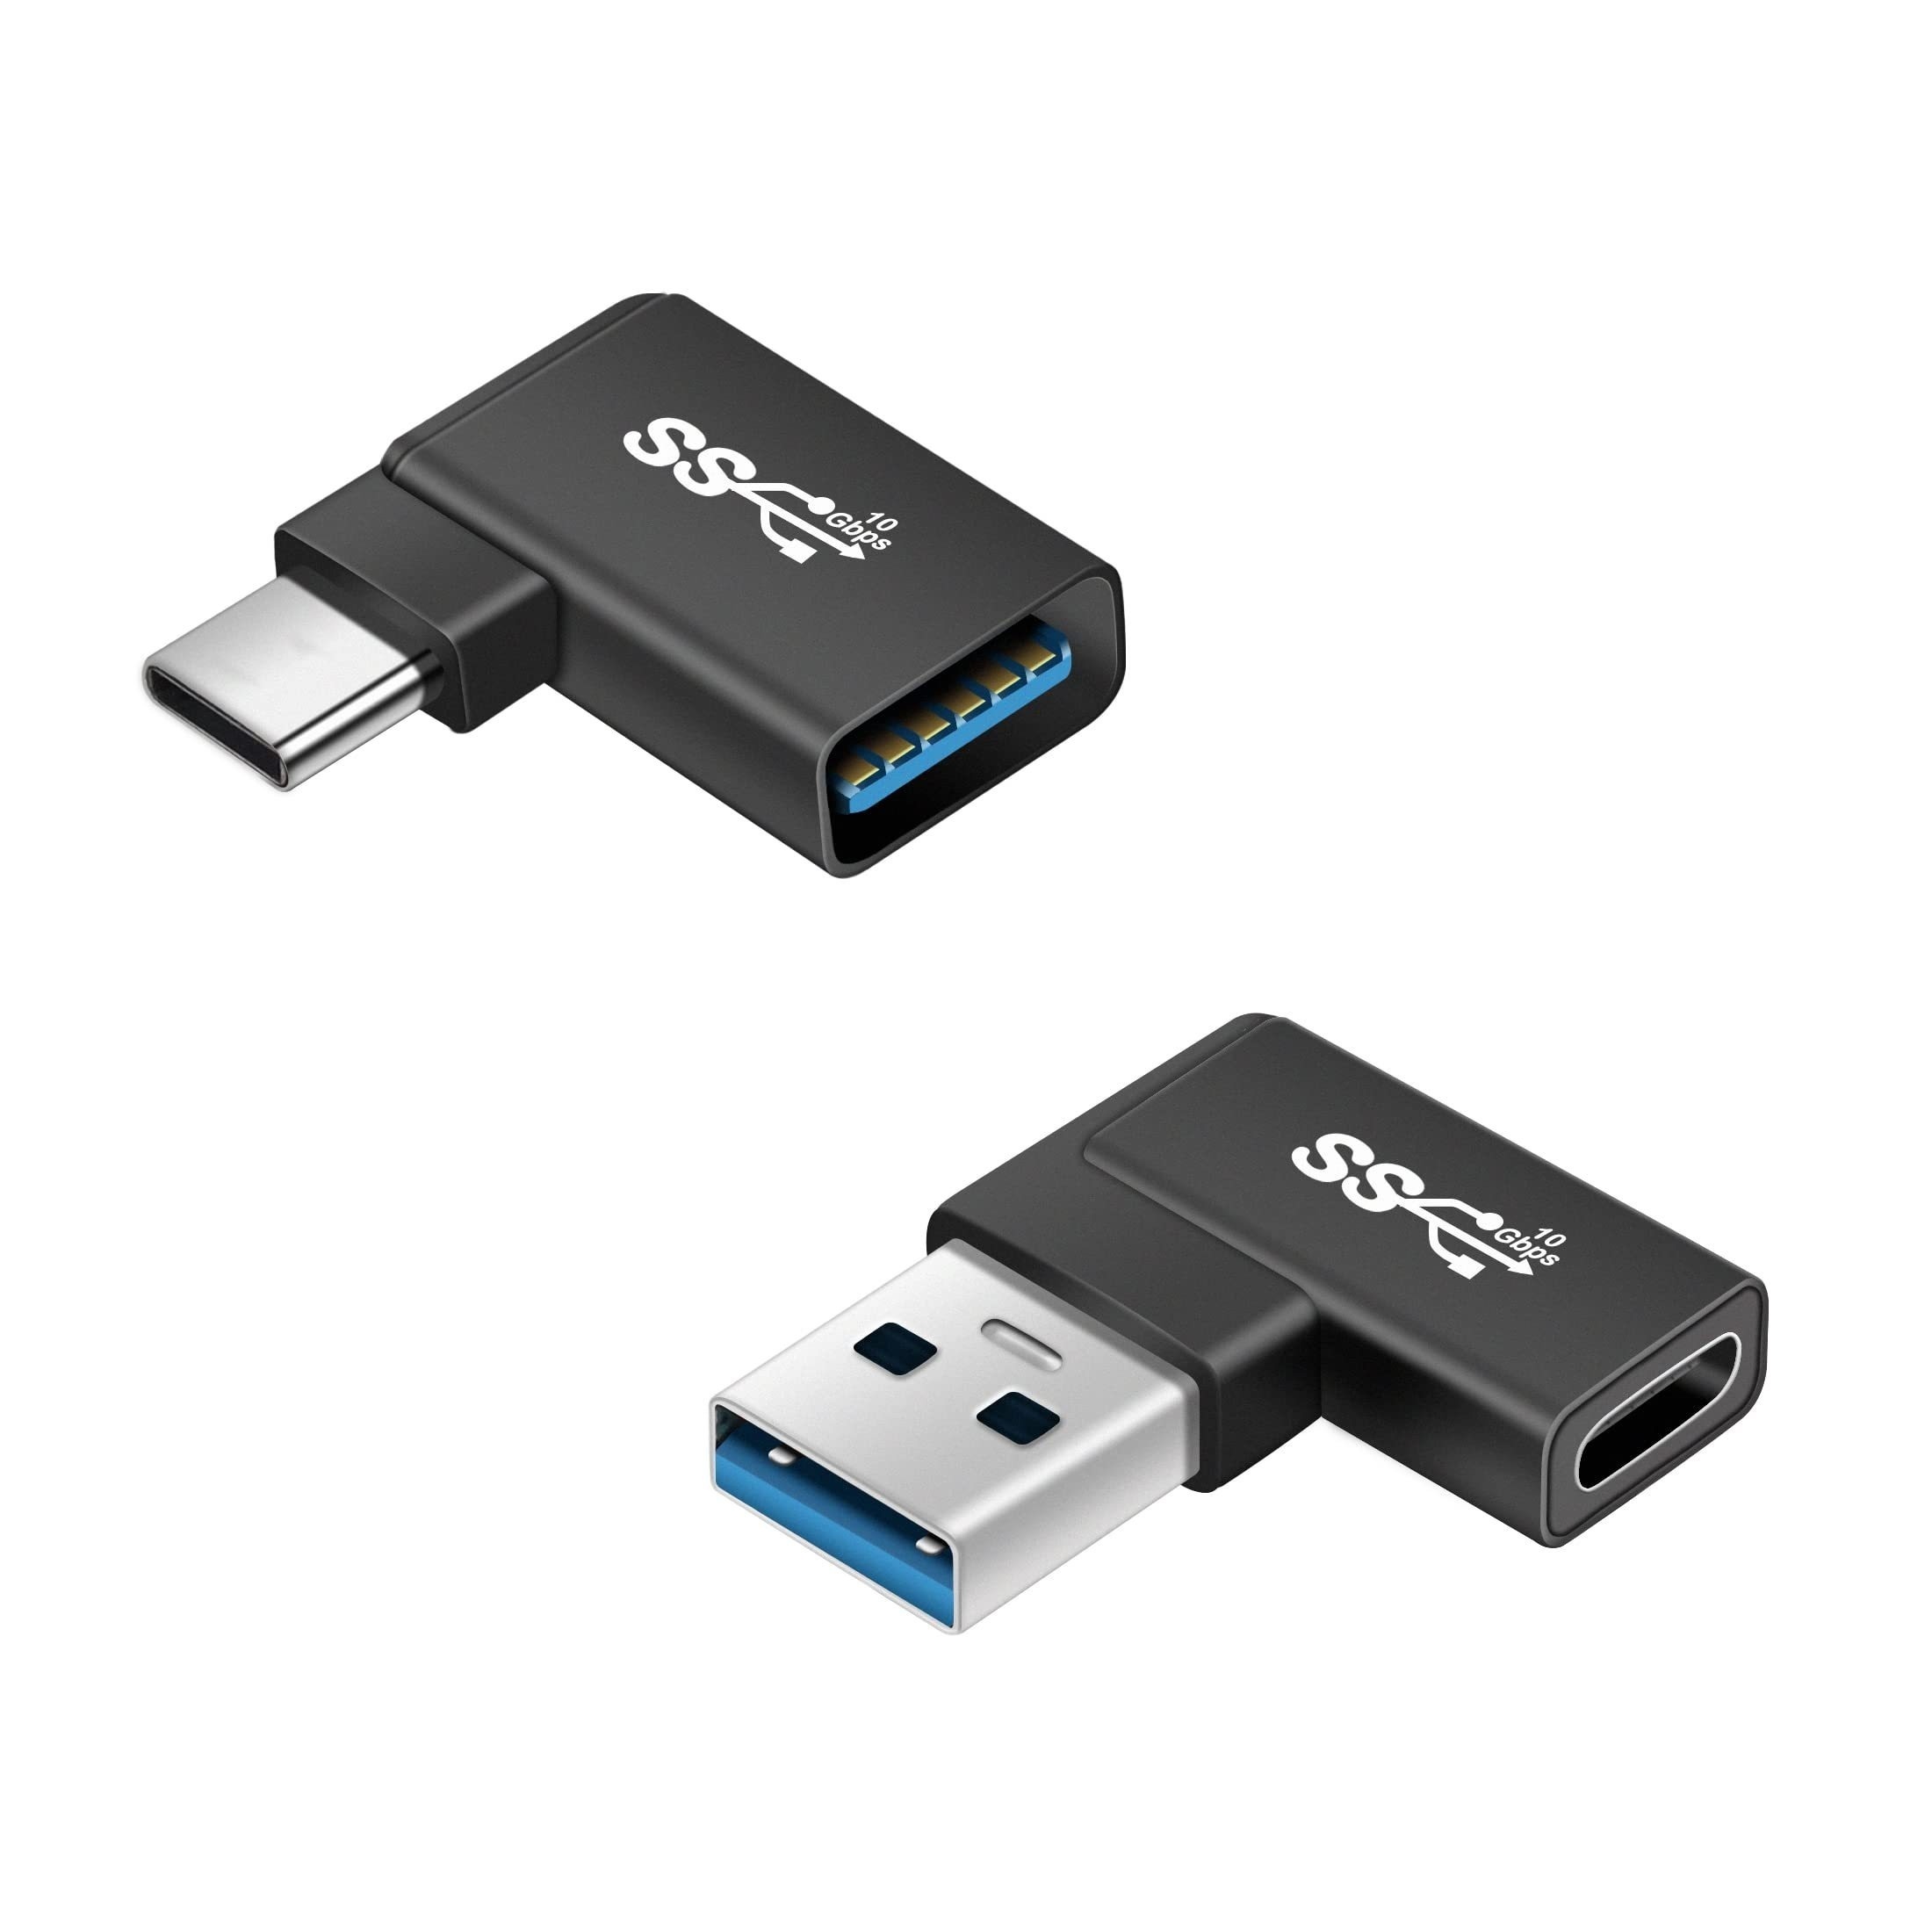 

Usb C To Usb Adapter (2 Packs), 90 Degree Usb A 3.0/10gbps Male Adapter To C-type Female Connector Is Suitable For Data Otg Converter And Interface Conversion Of Laptop, Tablet, Mobile Phone